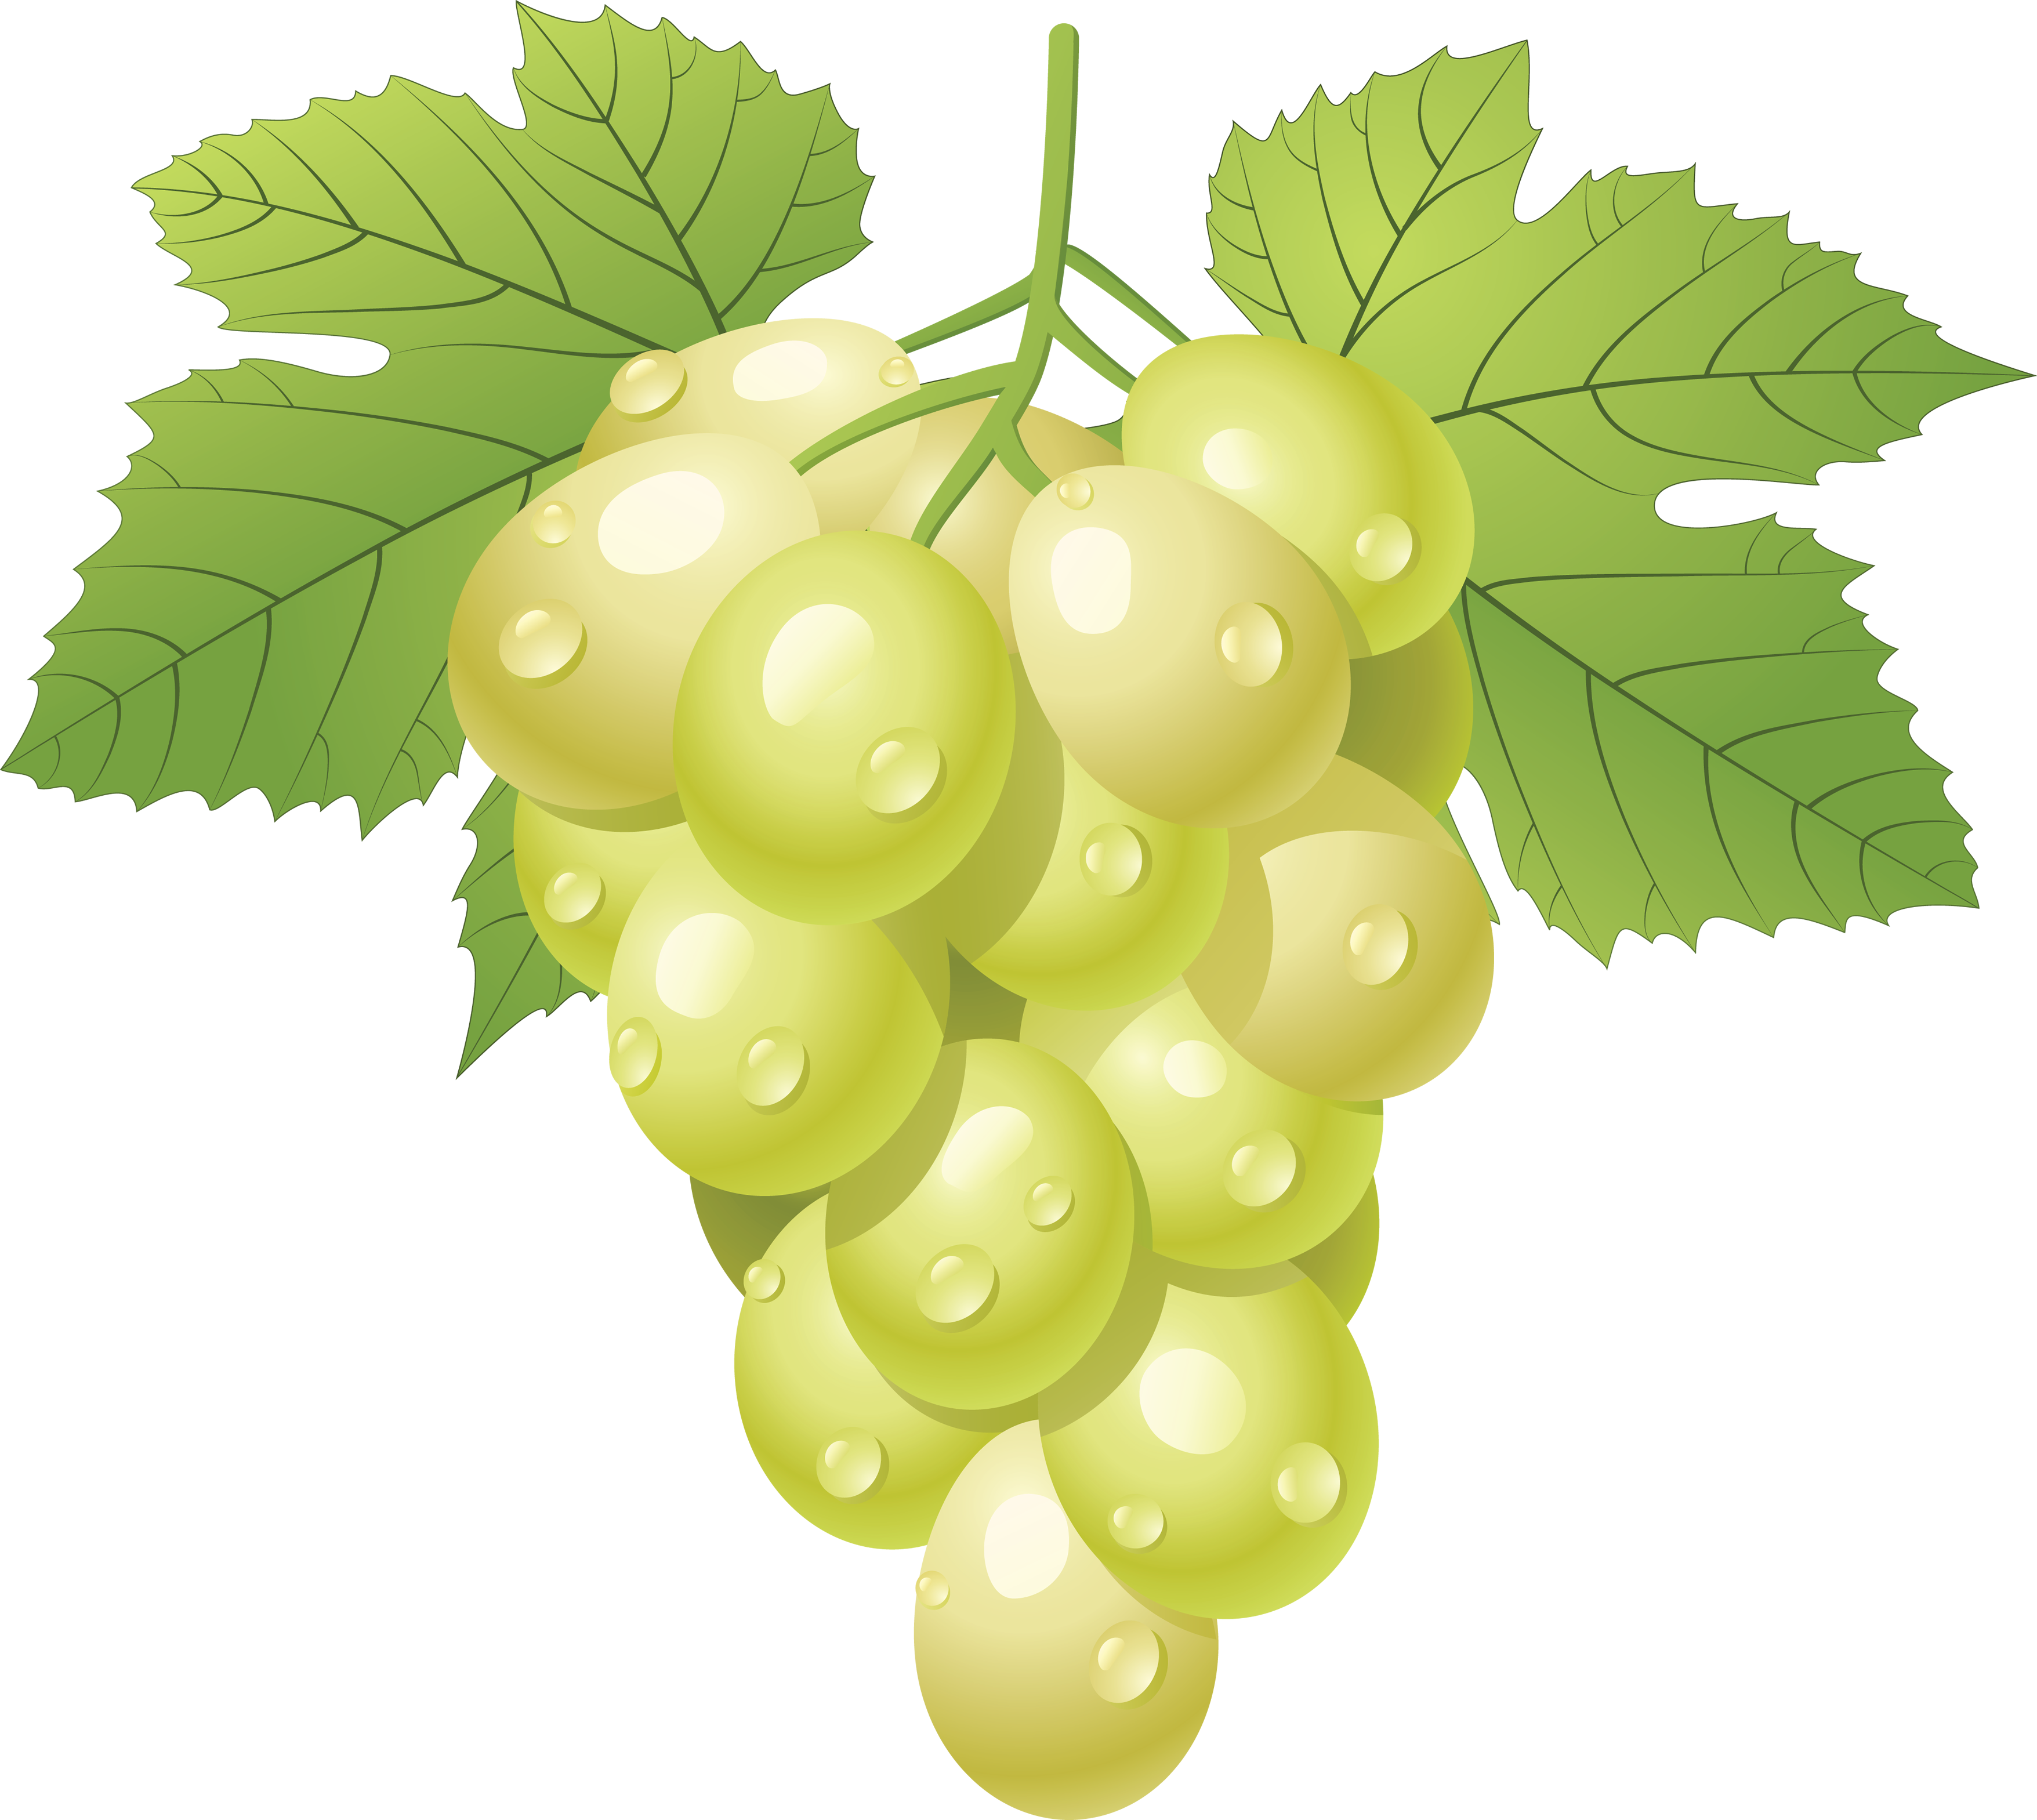 Grapes Grape Image Picture Download Download Png Clipart